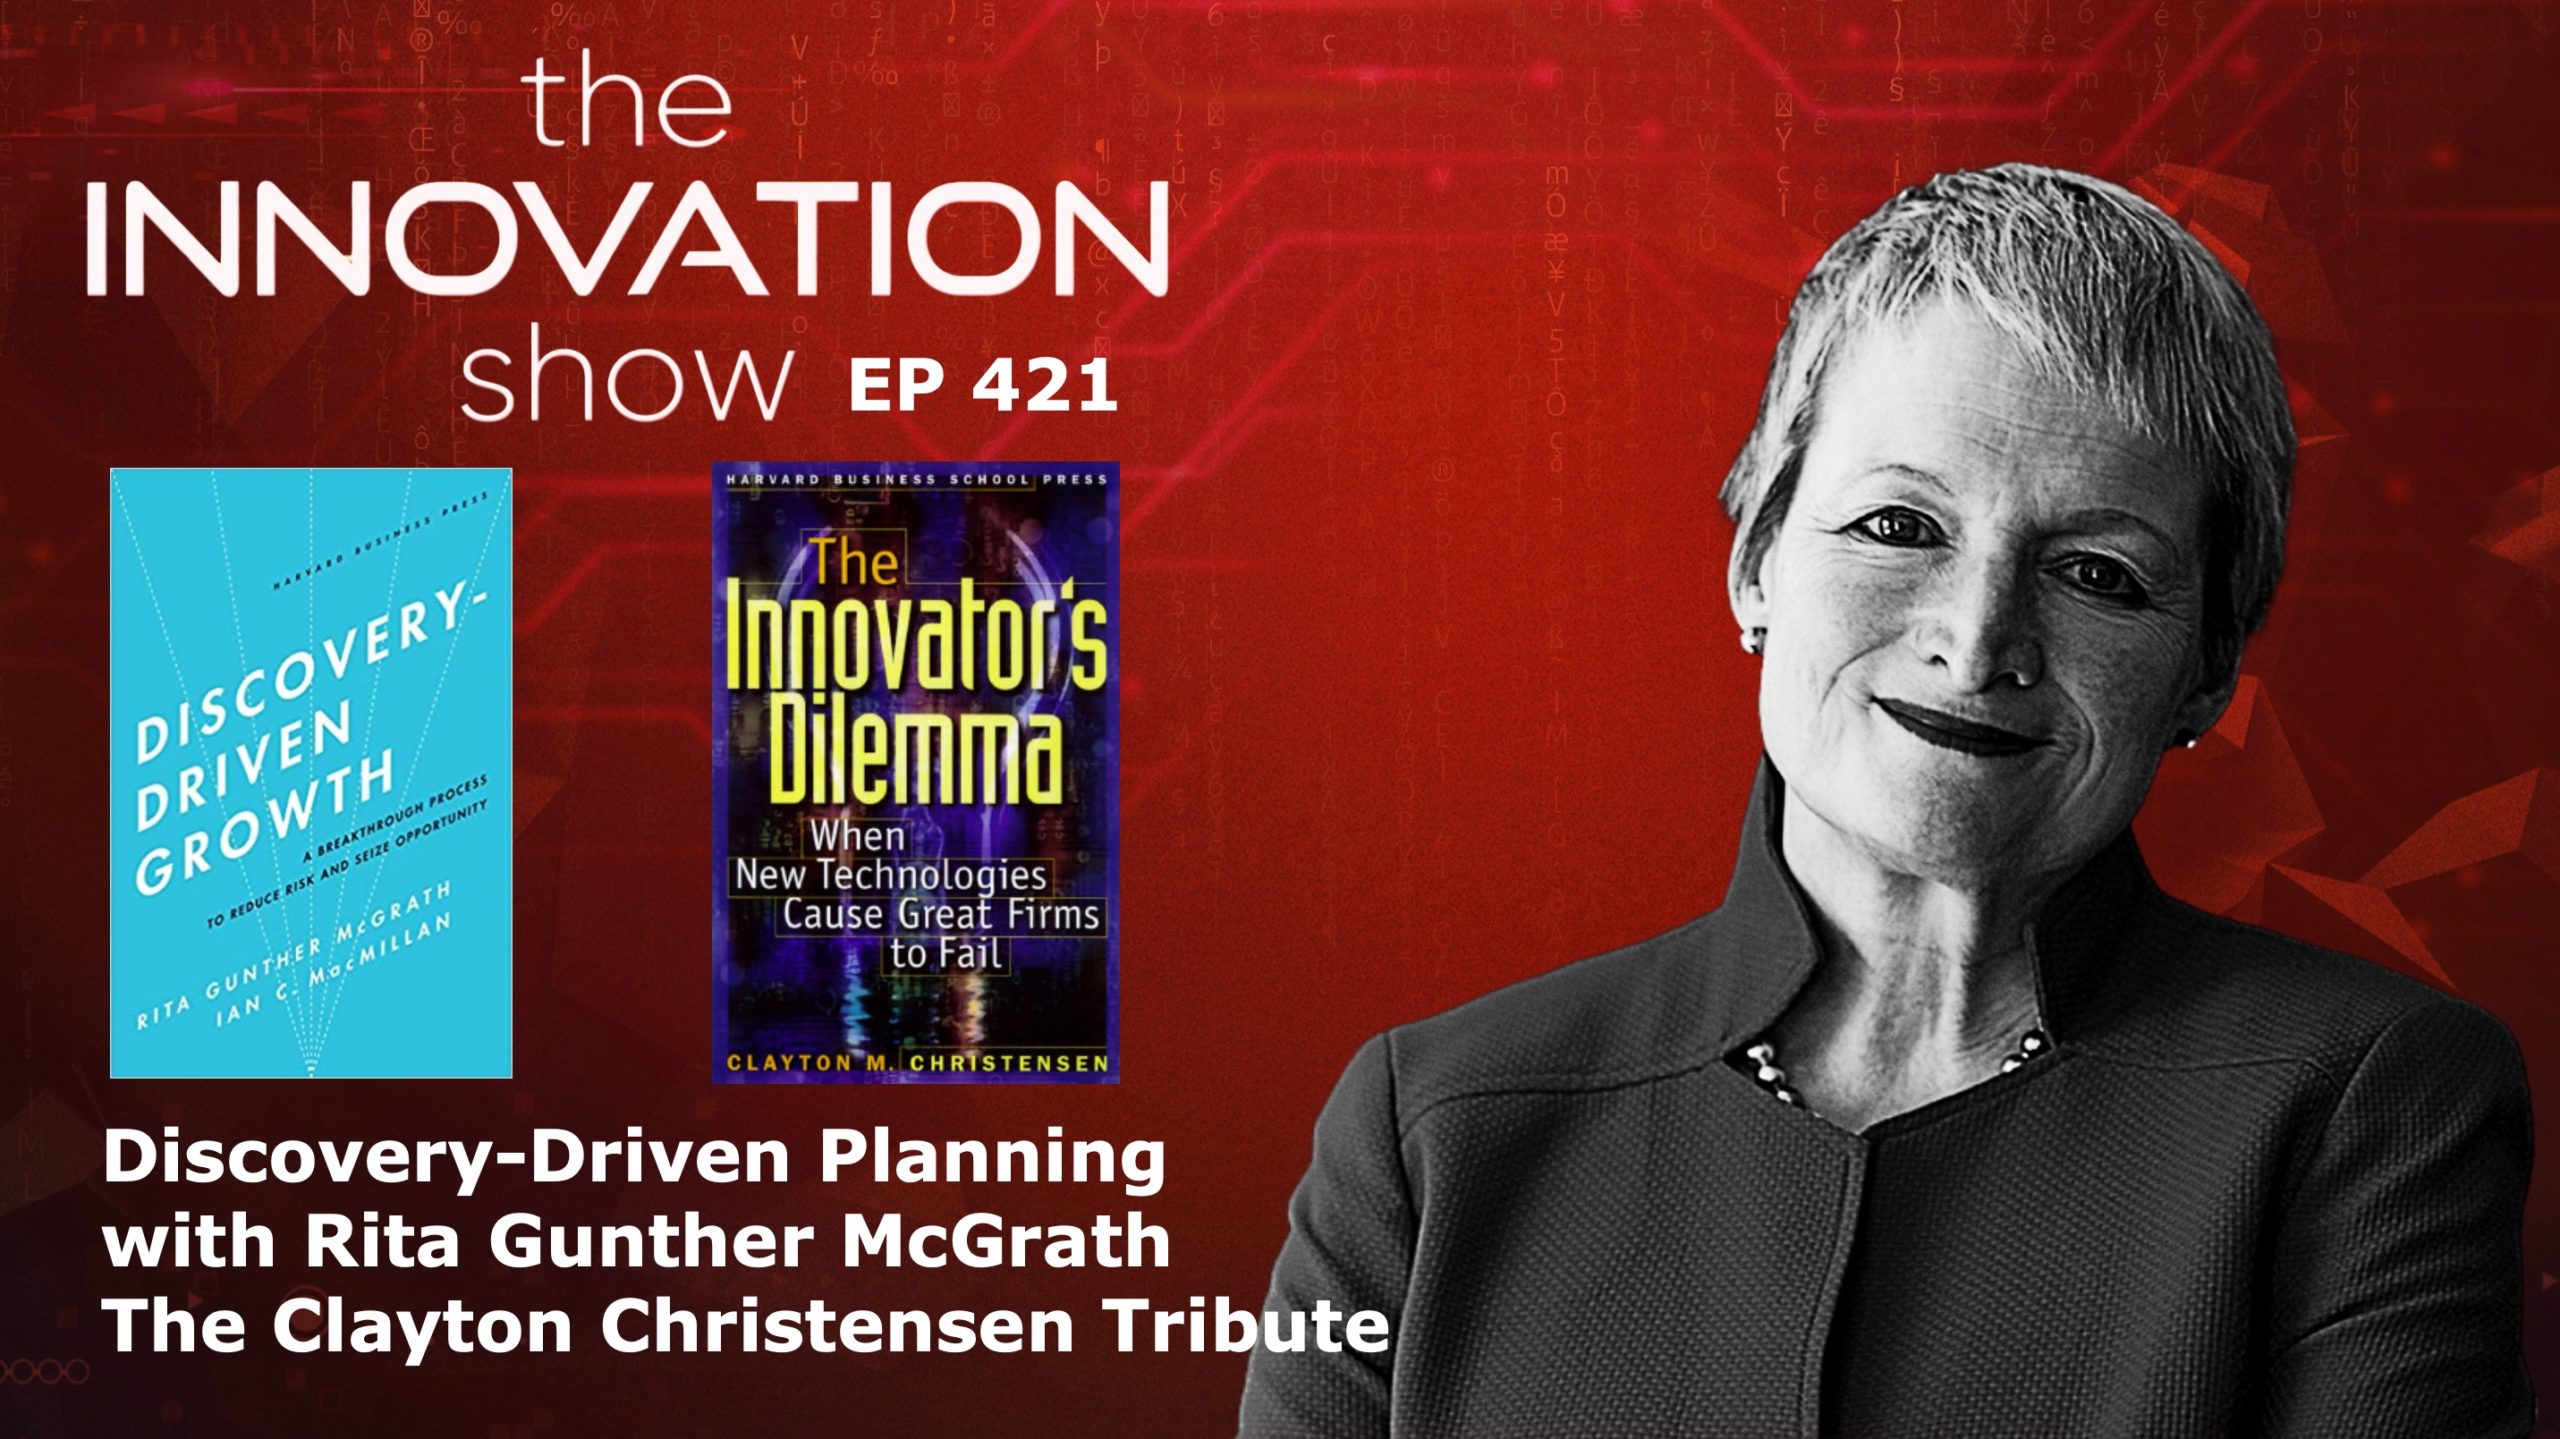 Discovery-Driven Planning with Rita Gunther McGrath The Clayton Christensen Tribute